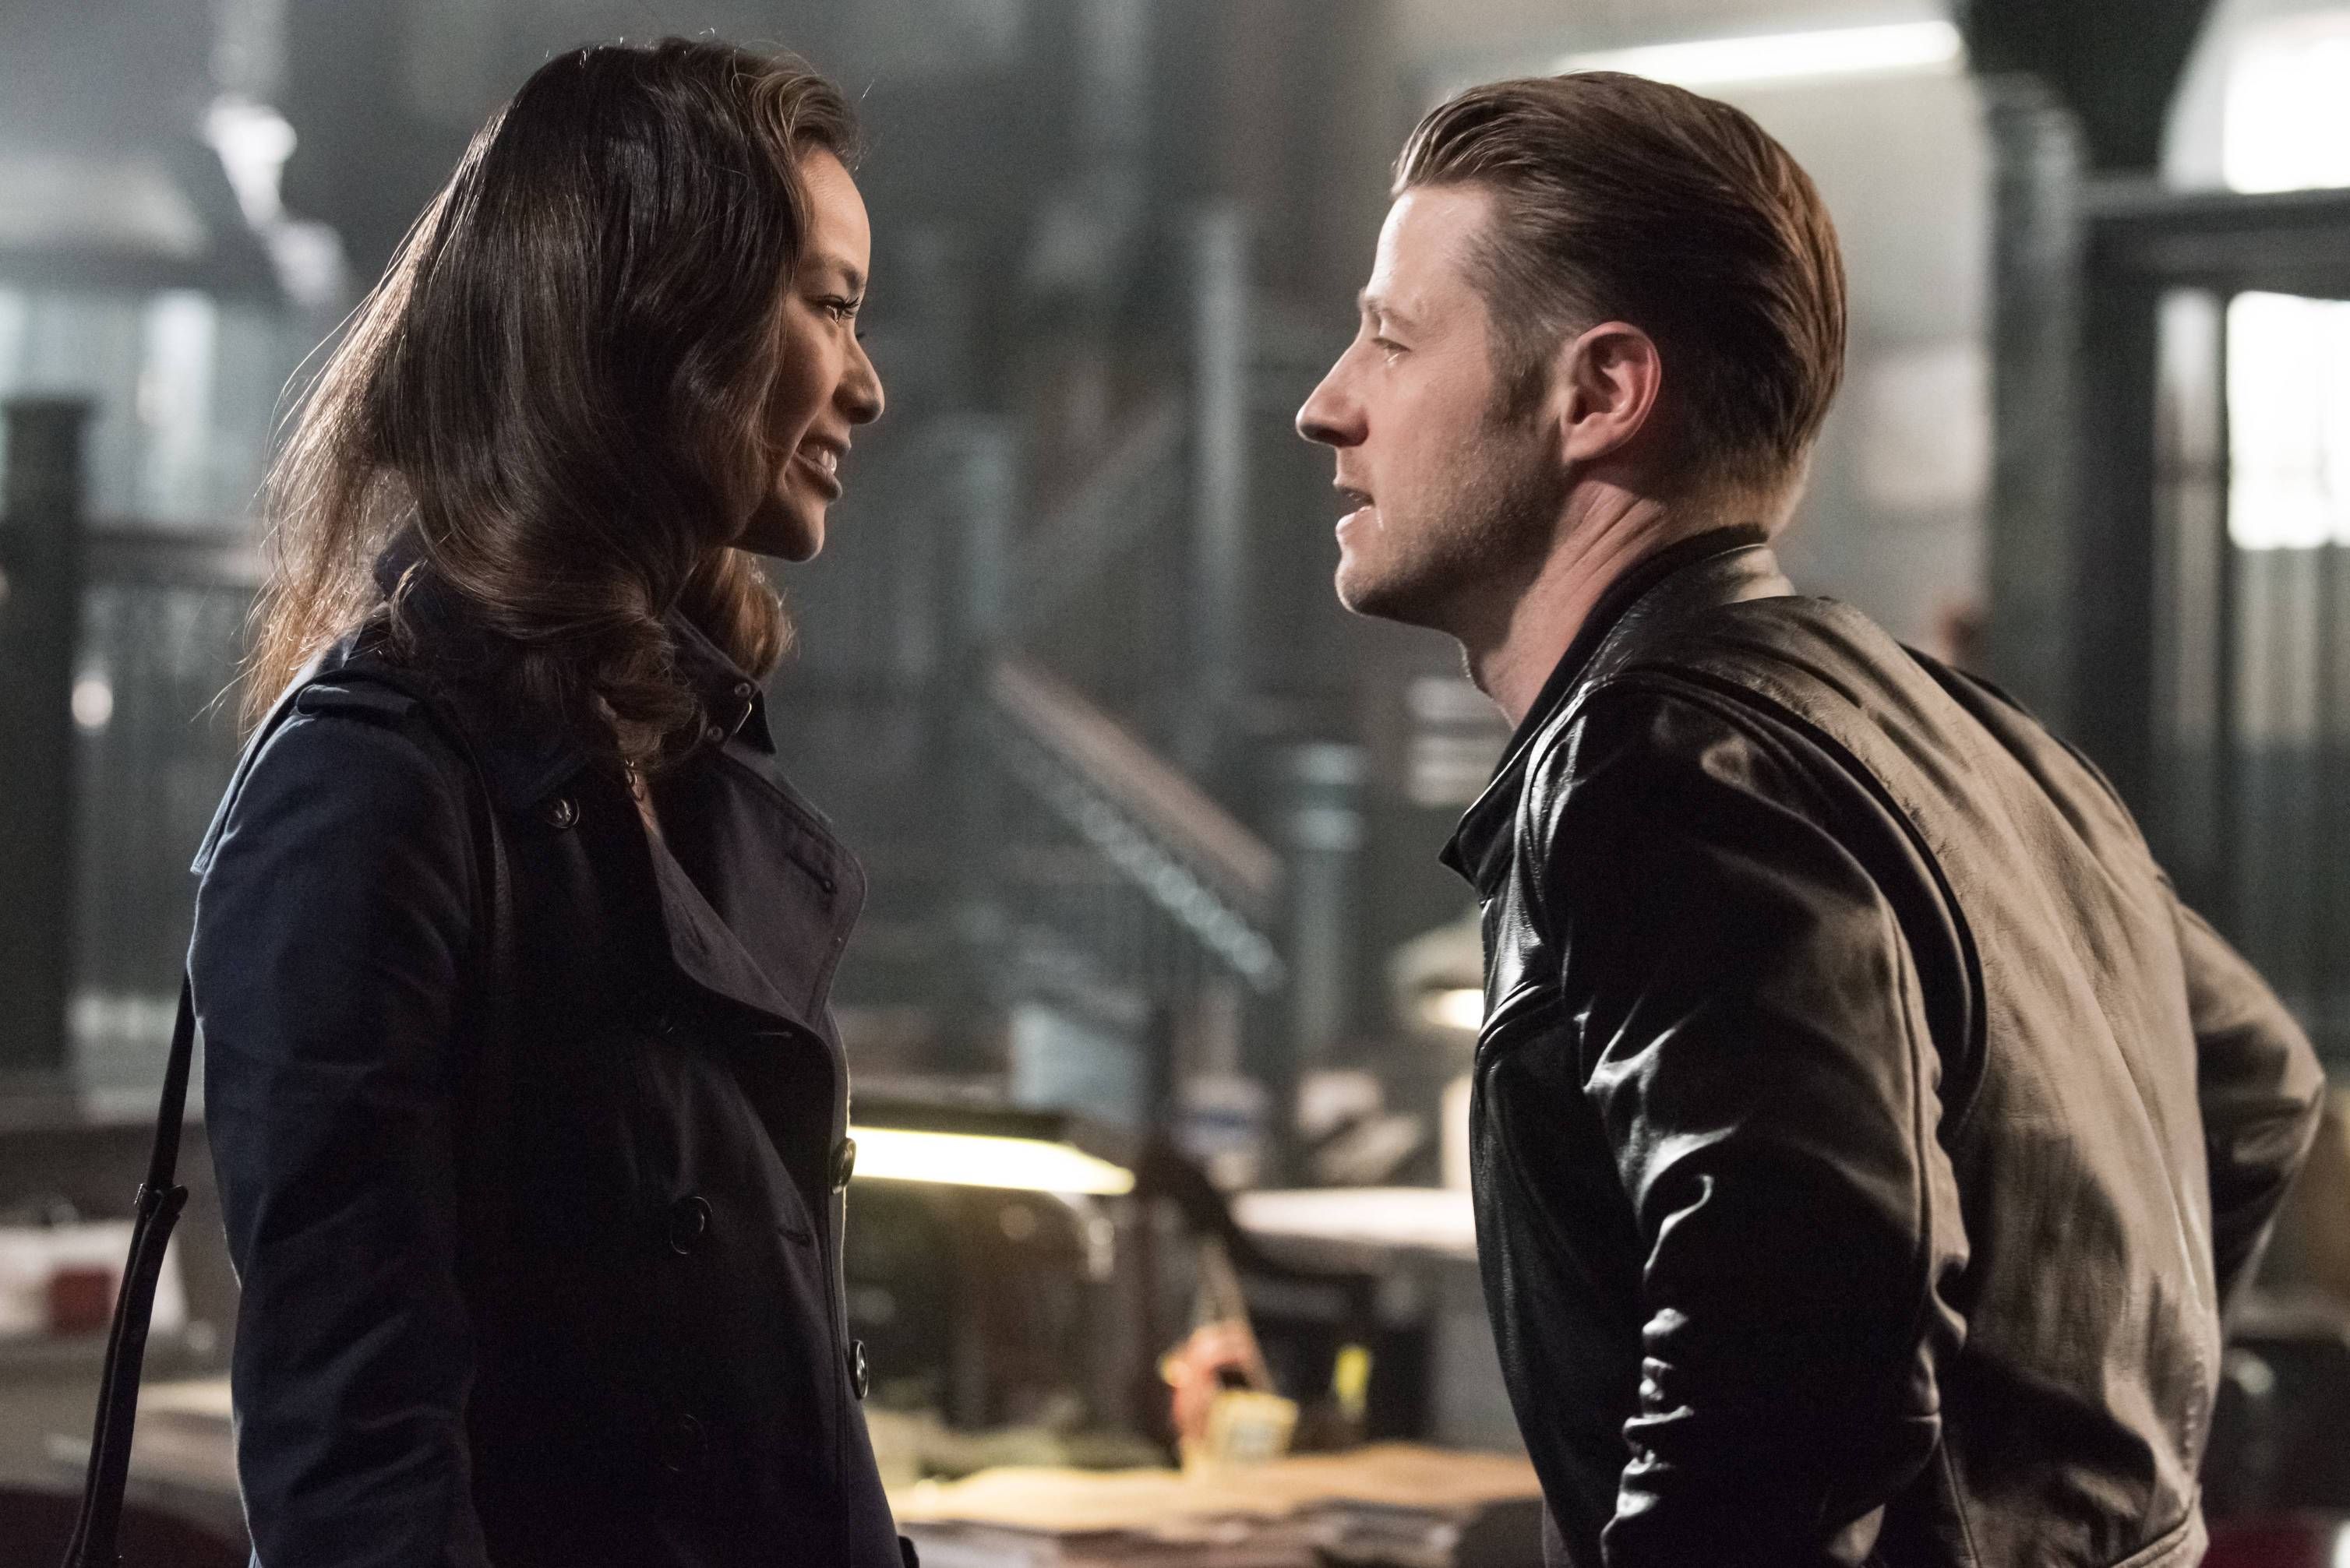 GOTHAM: L-R: Guest star Jamie Chung and Ben McKenzie in the ÒMad City: Better to Reign in HellÉÓ season premiere episode of GOTHAM airing airing Monday, Sept. 19 (8:00-9:01 PM ET/PT) on FOX. ©2015 Fox Broadcasting Co. Cr: Jeff Neumann/FOX.